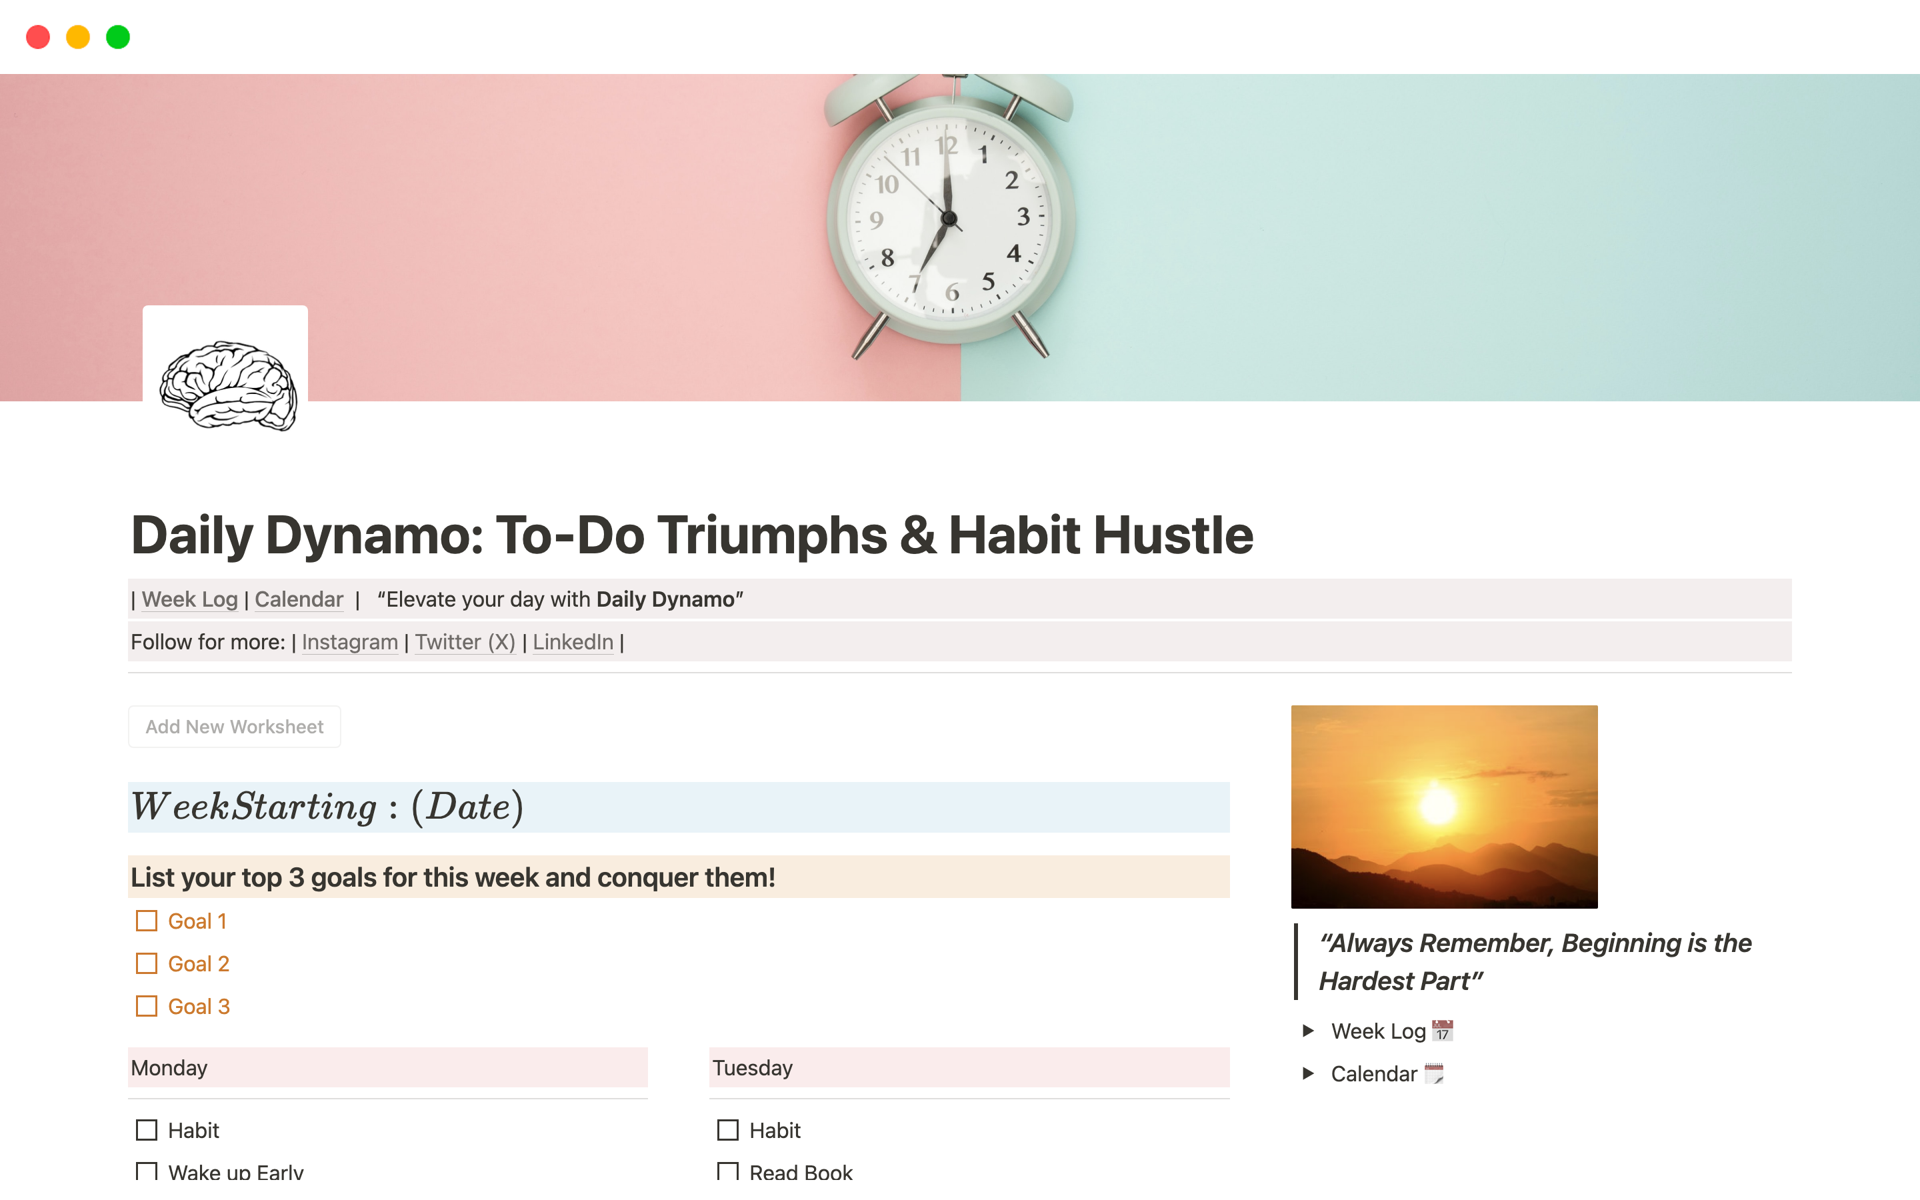 "Elevate your daily grind with Daily Dynamo: To-Do Triumphs & Habit Hustle – the ultimate productivity tool seamlessly managing your tasks, to-do lists, and habits!"